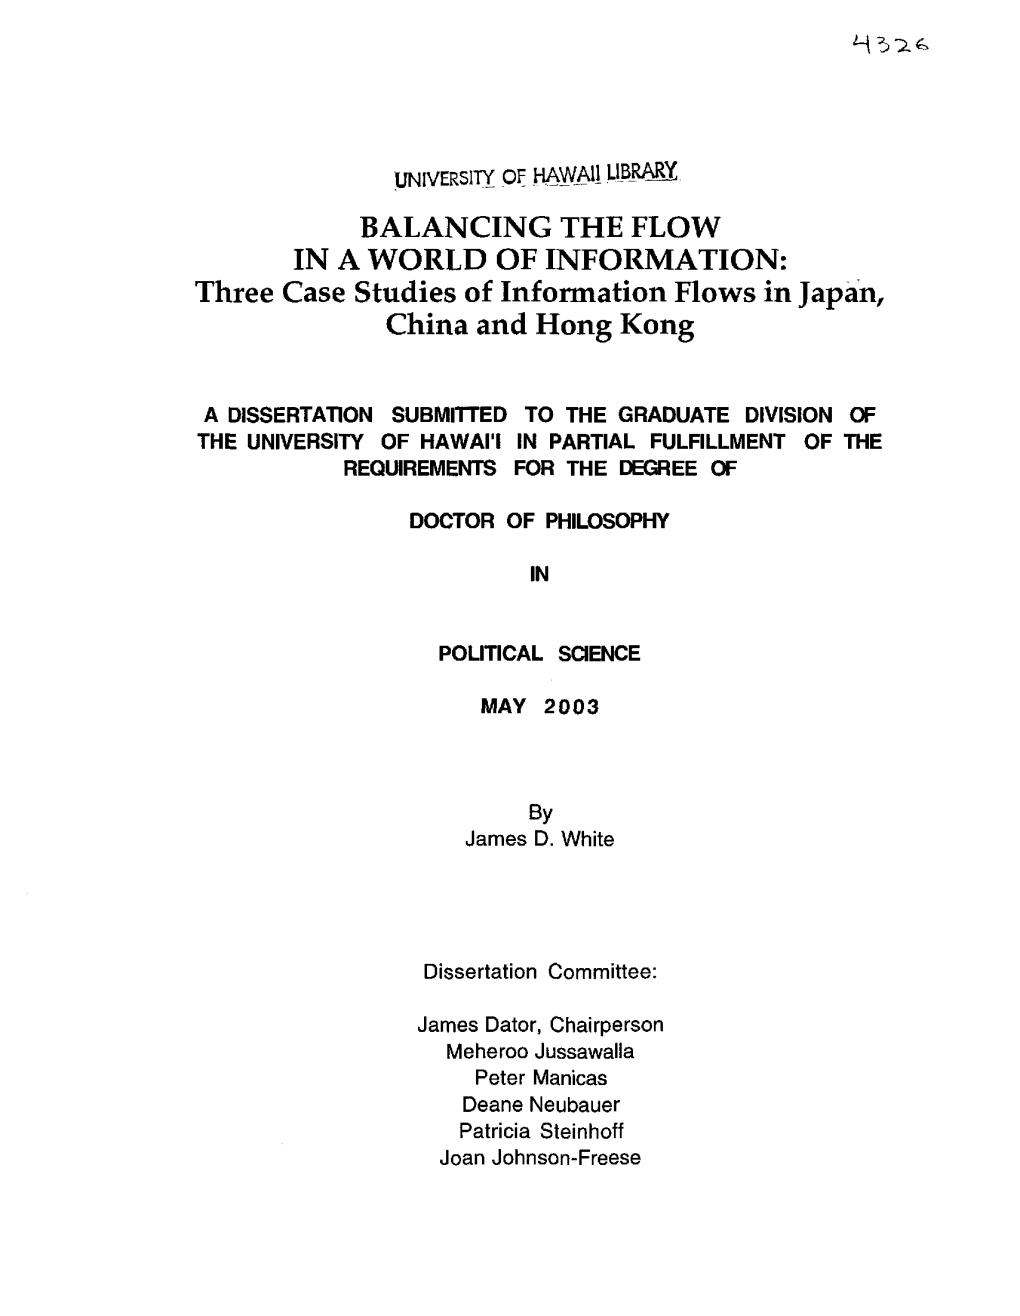 Three Case Studies of Infonnation Flows in Japan, China and Hong Kong